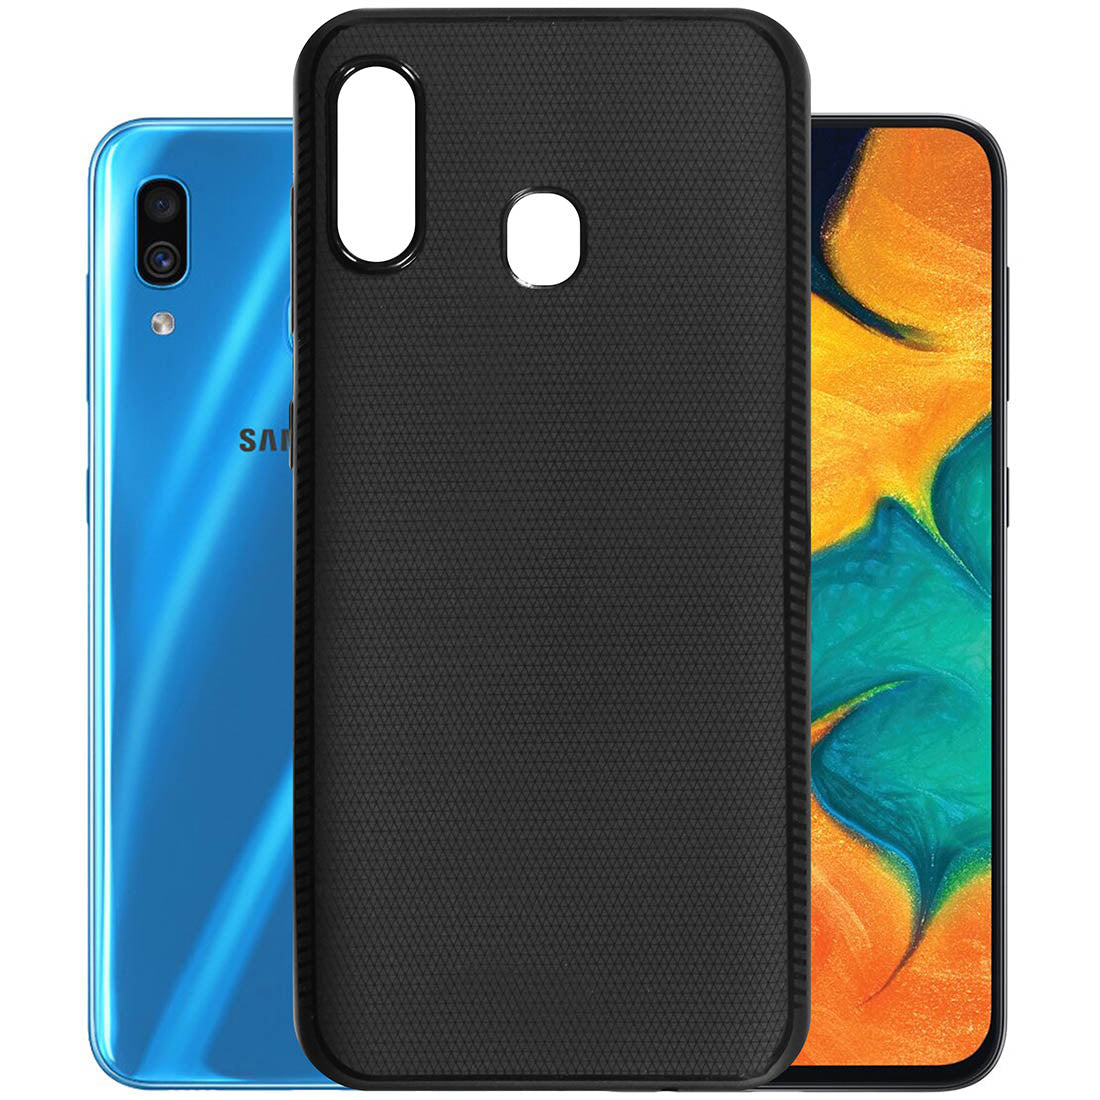 Comfort Grip Back Case Cover for Samsung Galaxy A30